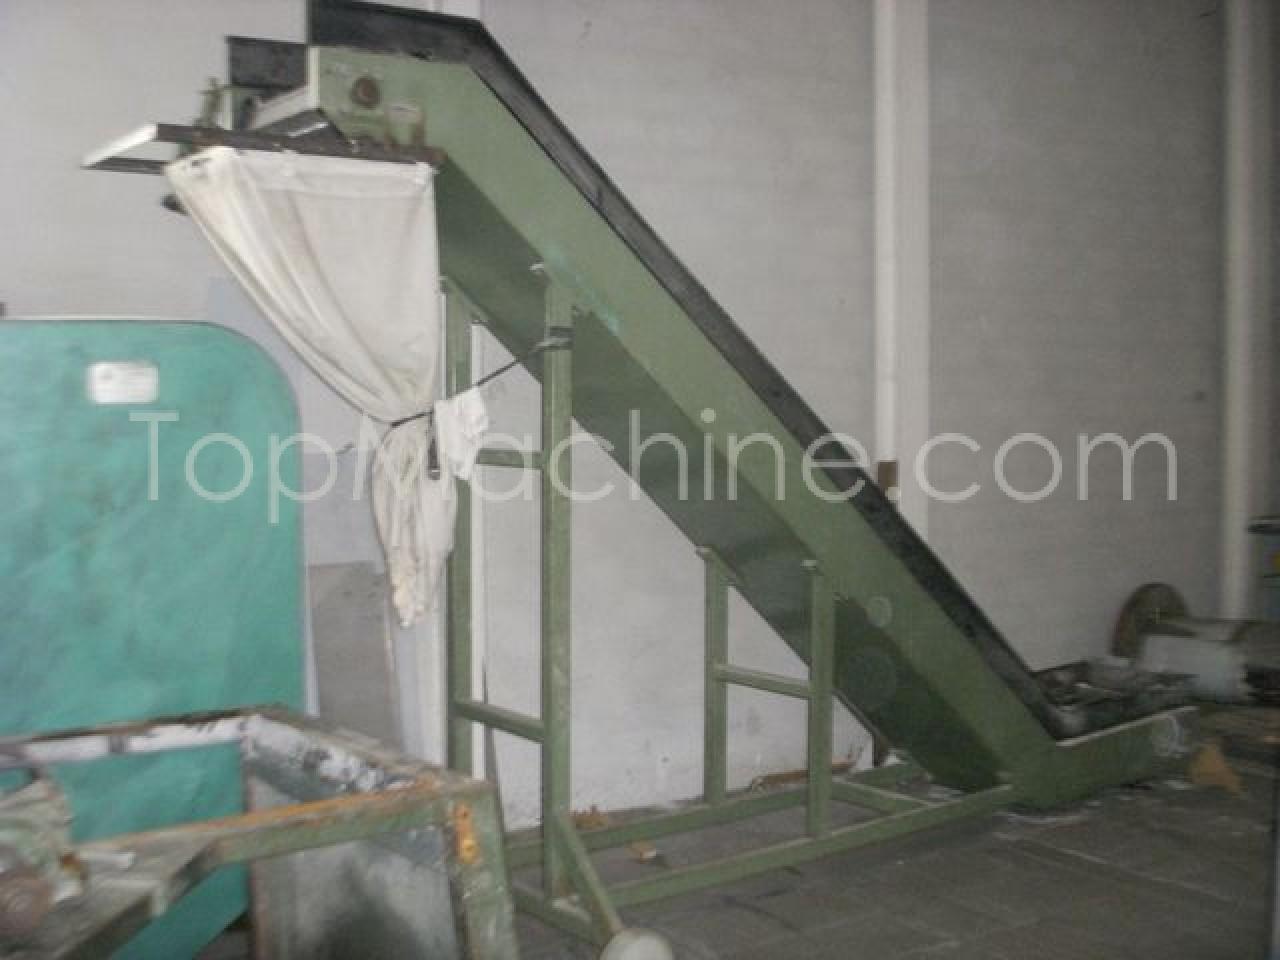 Used Sant Andrea G15/600 Recyclage Shredder